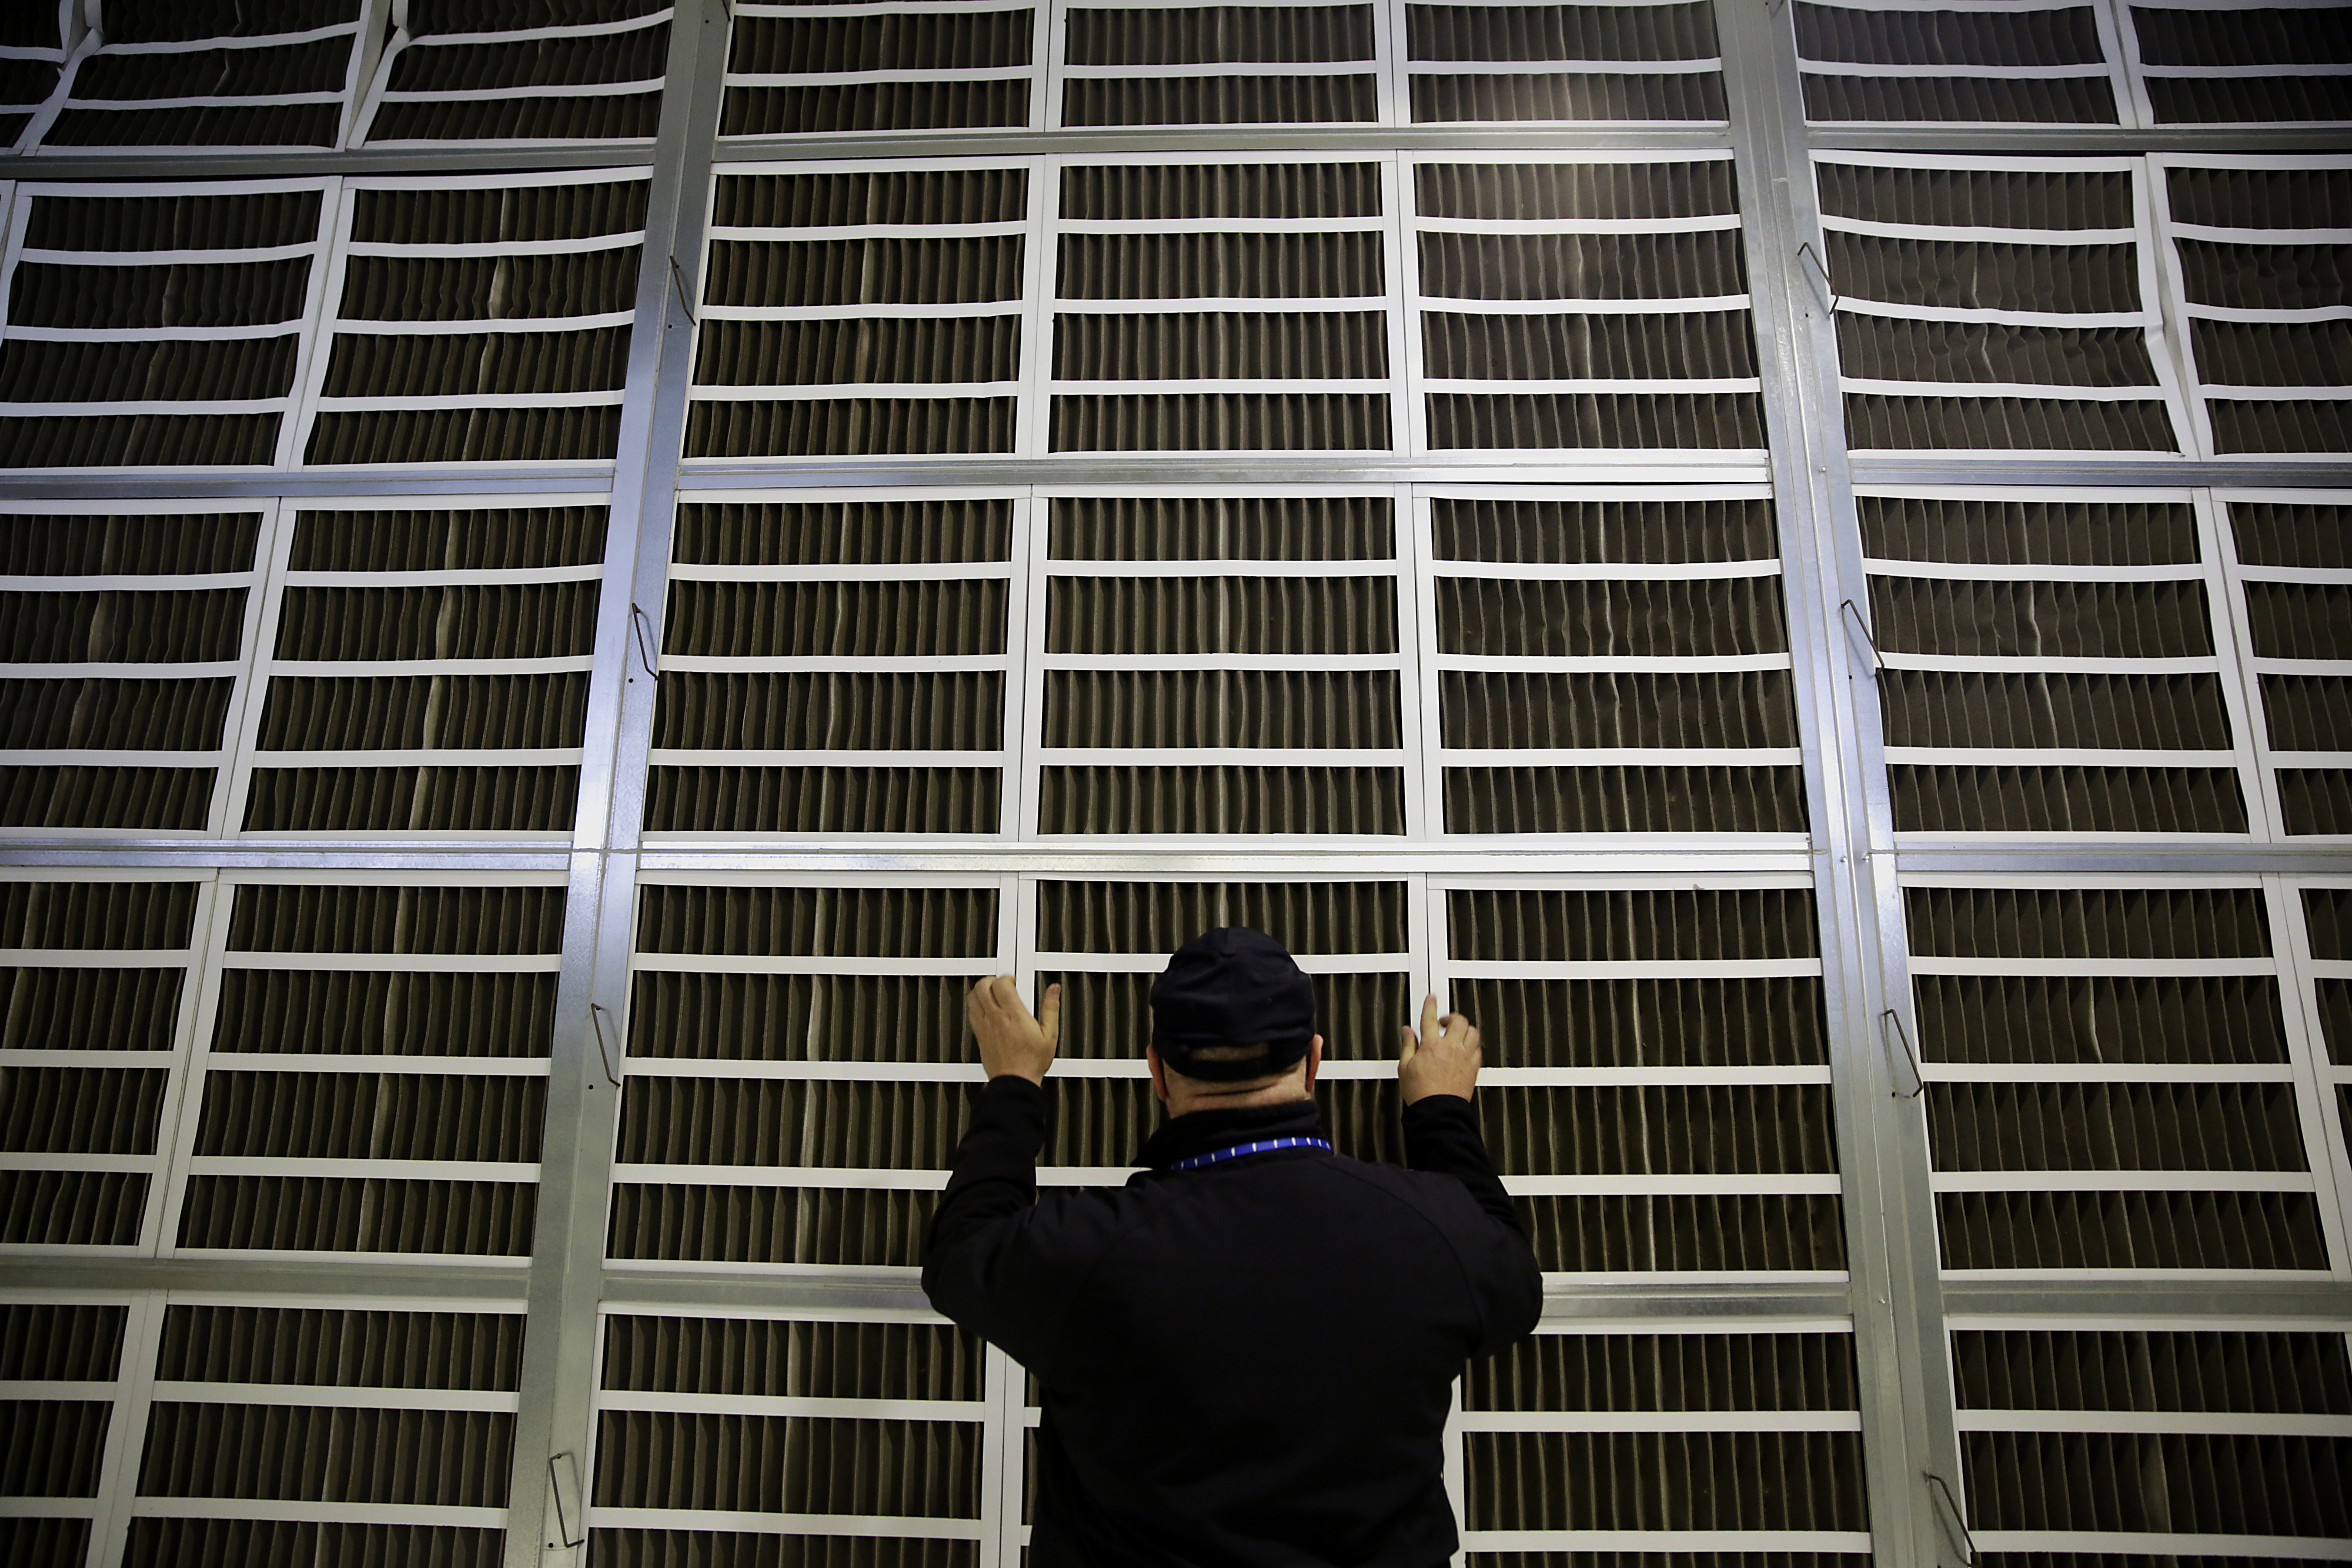 Operations inside the Facebook data center (Bloomberg/Getty Images)